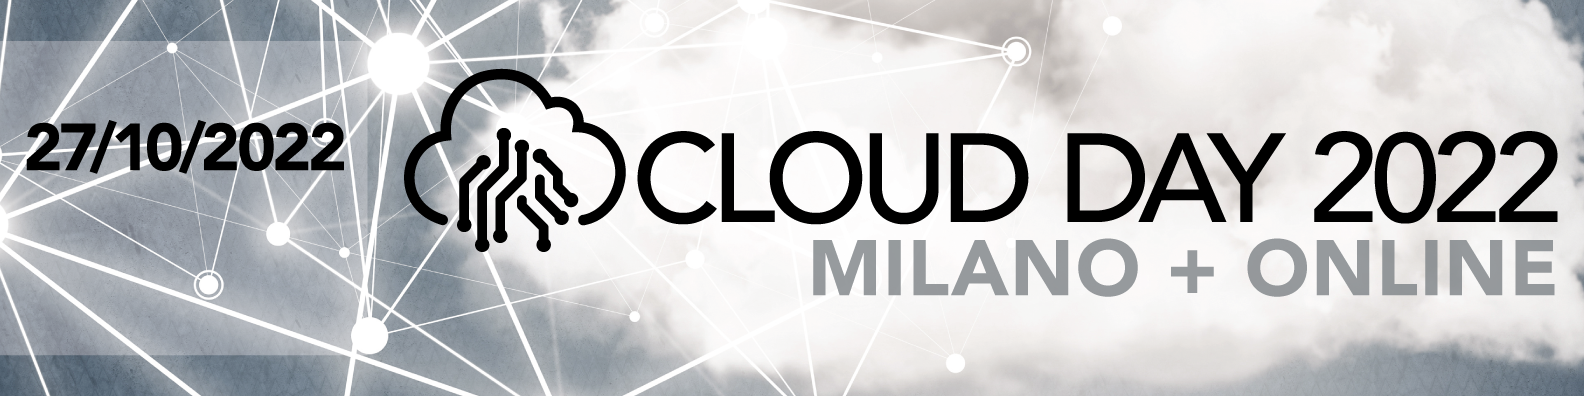 Banner dell'evento Cloud Day 2022